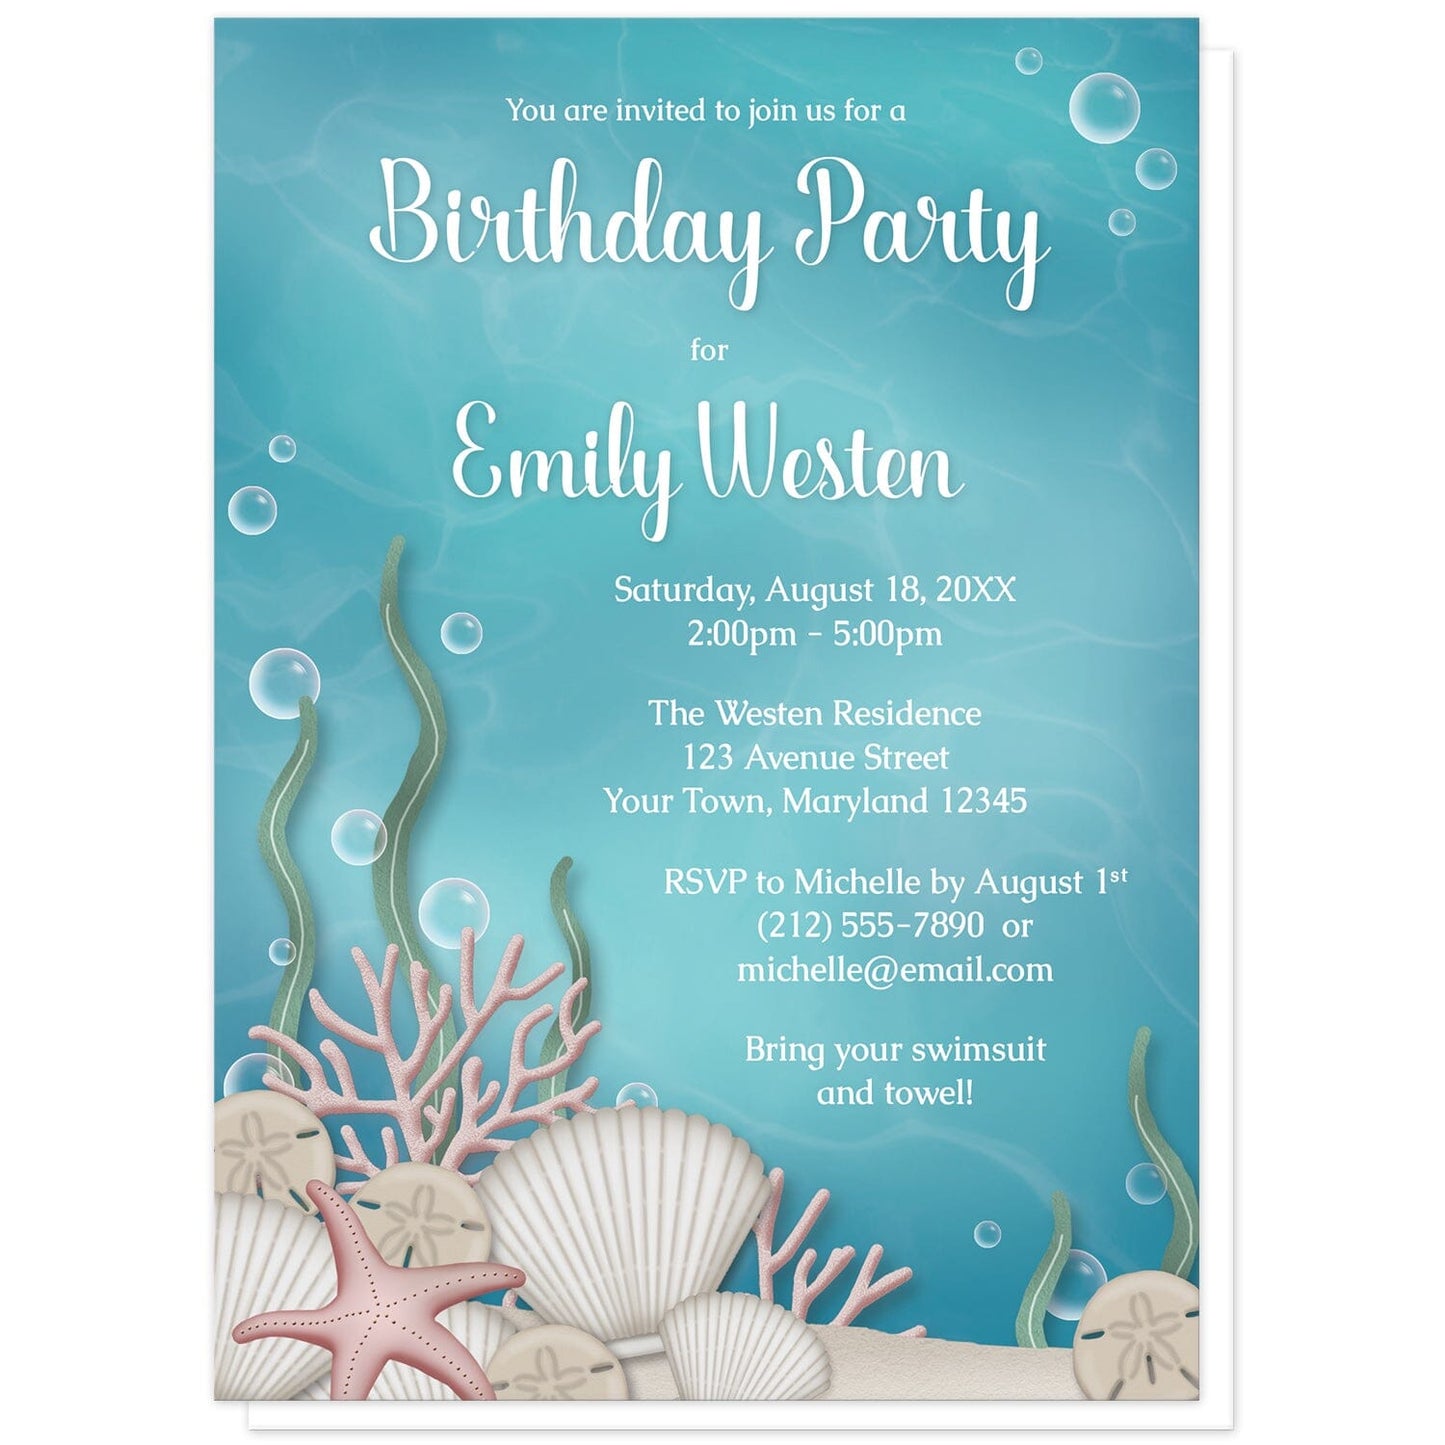 Whimsical Under the Sea Birthday Party Invitations